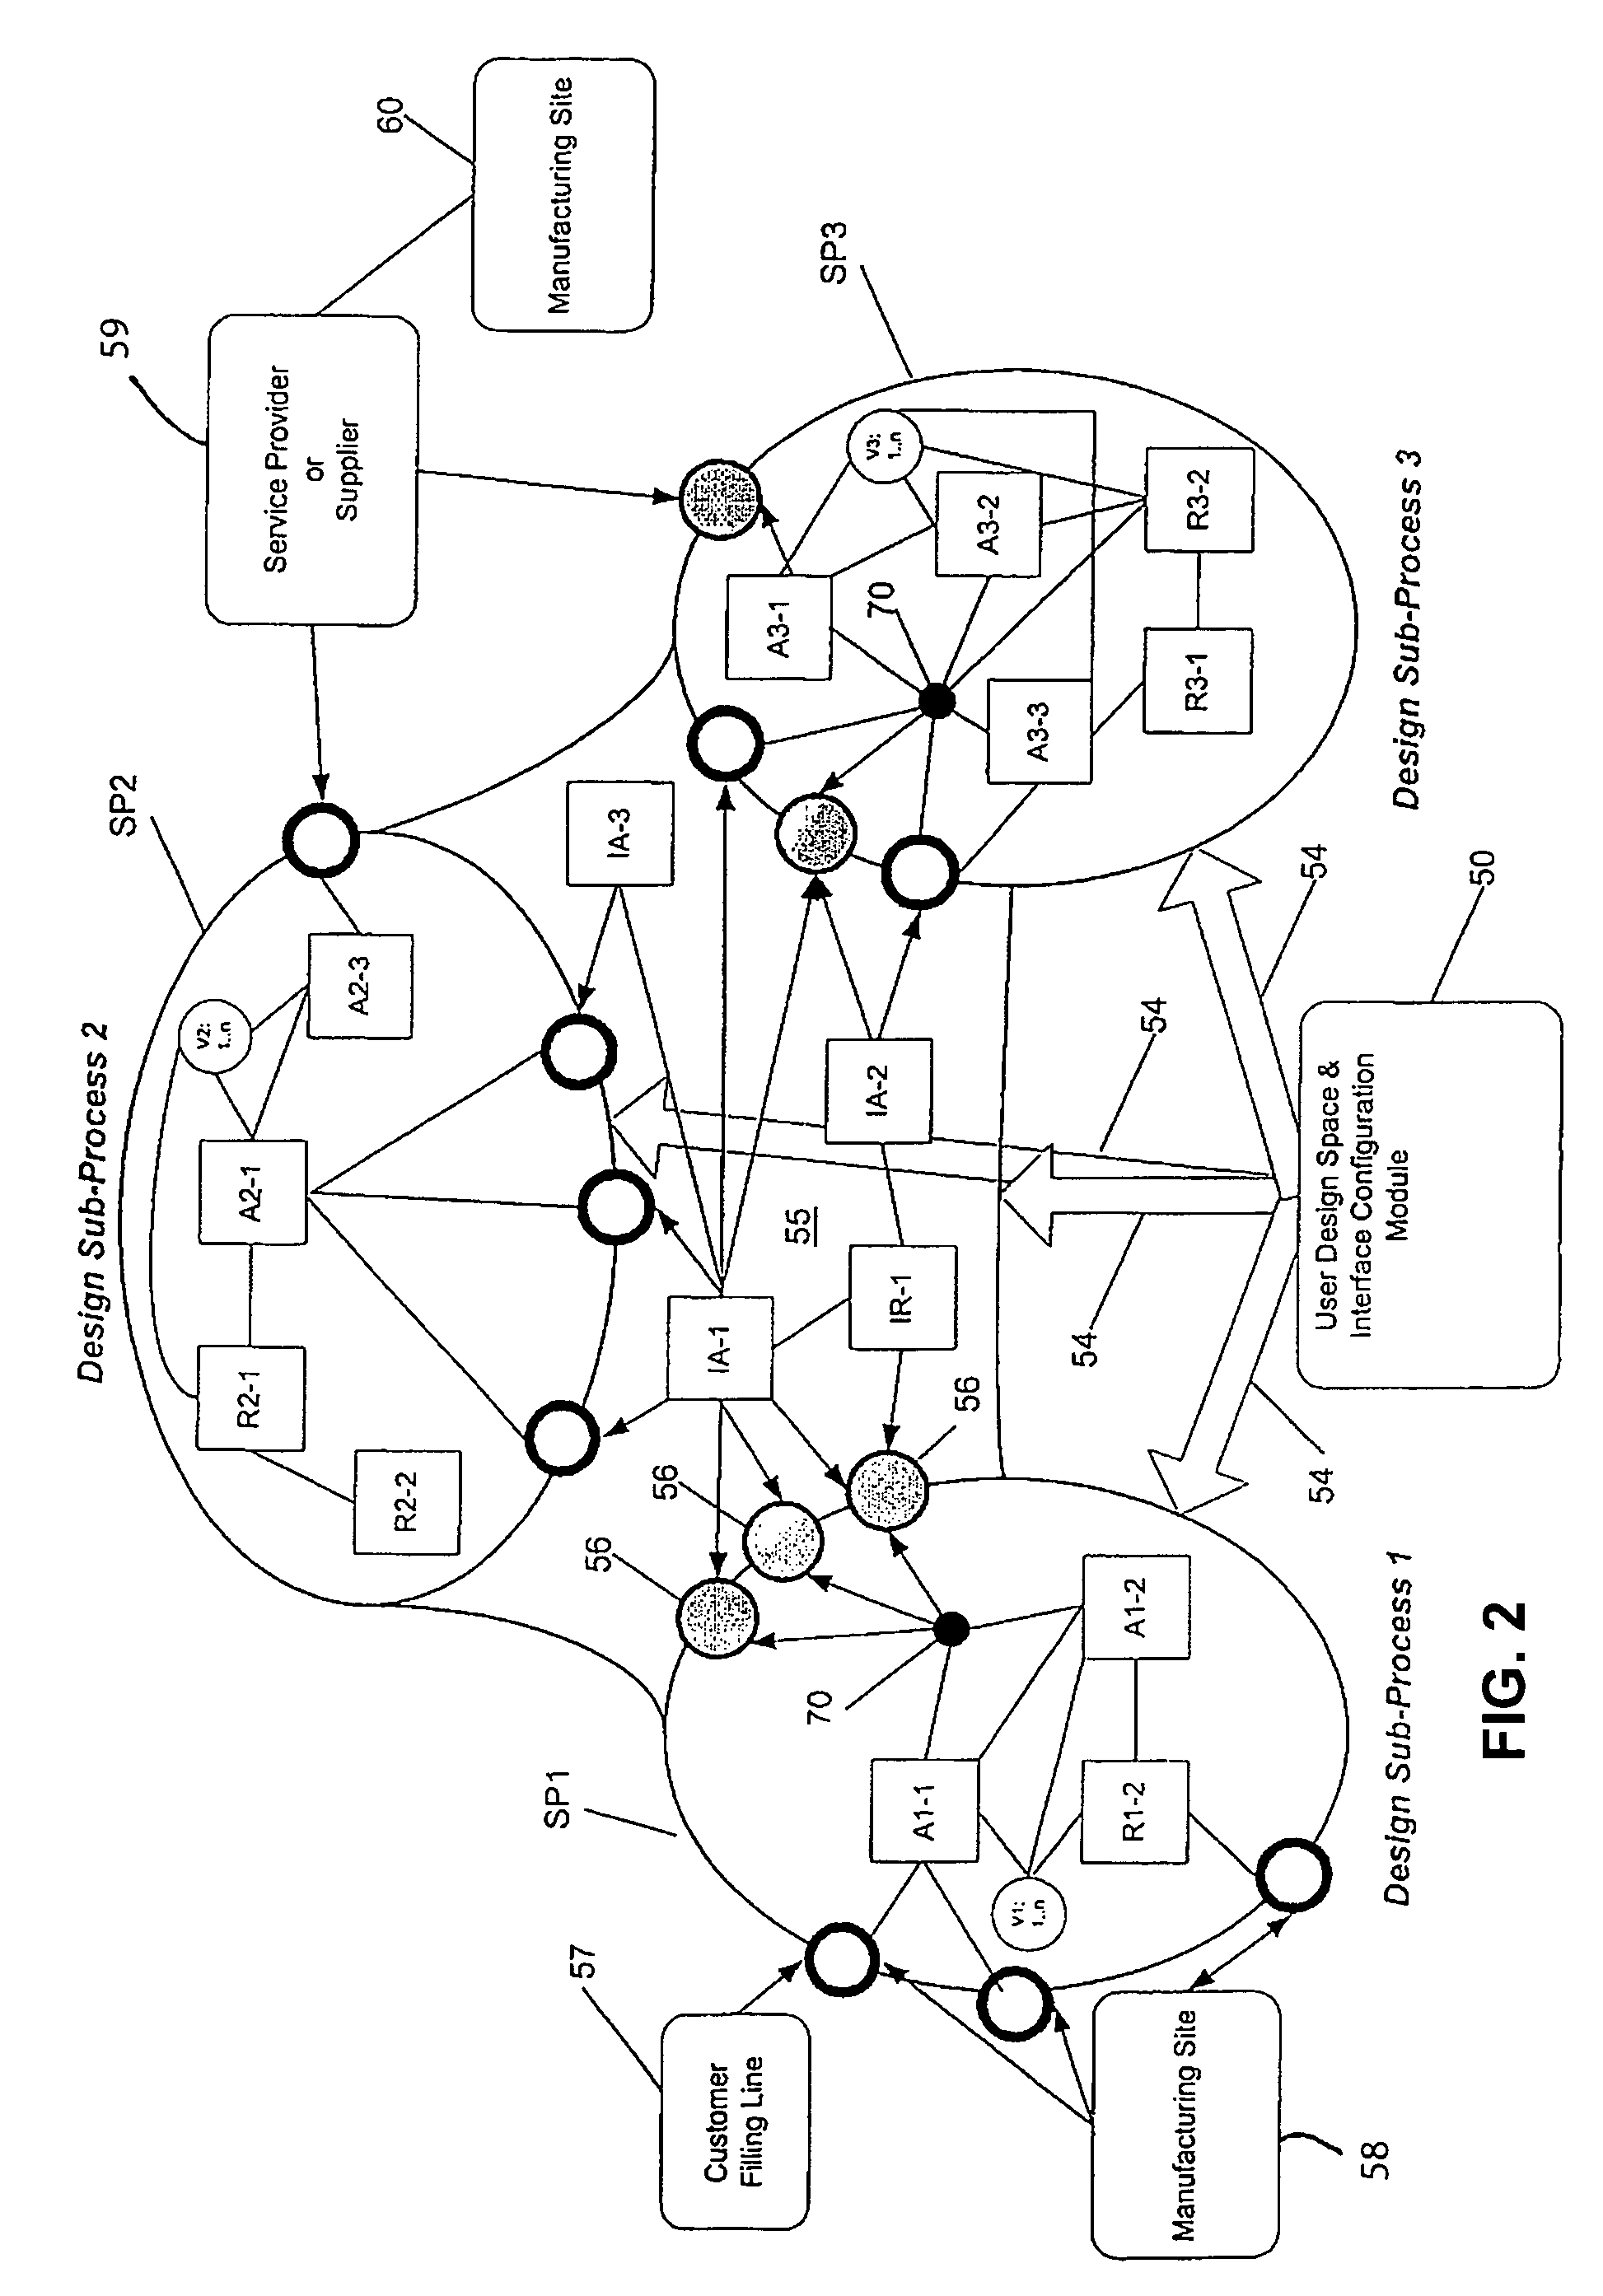 System and method for controlling a design process by specifying active variables and passive variables